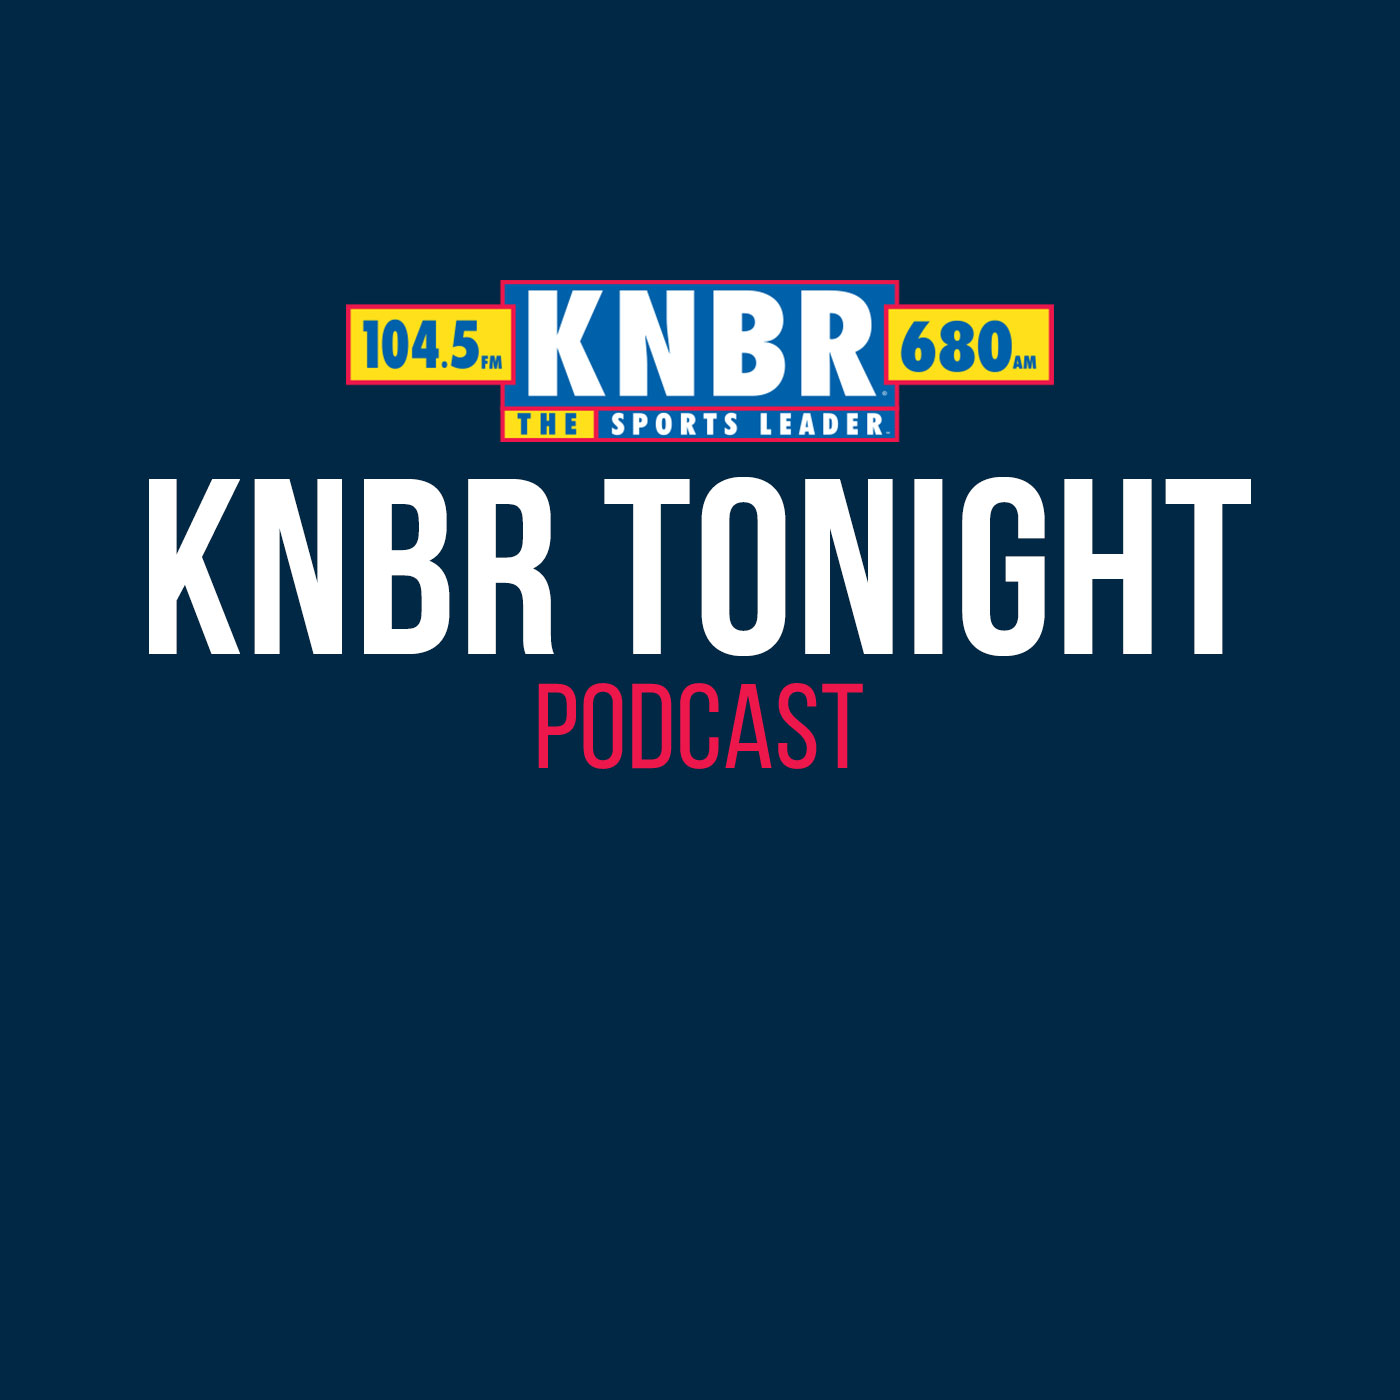 11-30 Dalton Johnson joins KNBR Tonight with Dieter Kurtenbach to give insight on the Giants ahead of the lockout, 49ers rolling into Seattle and the Warriors hot start